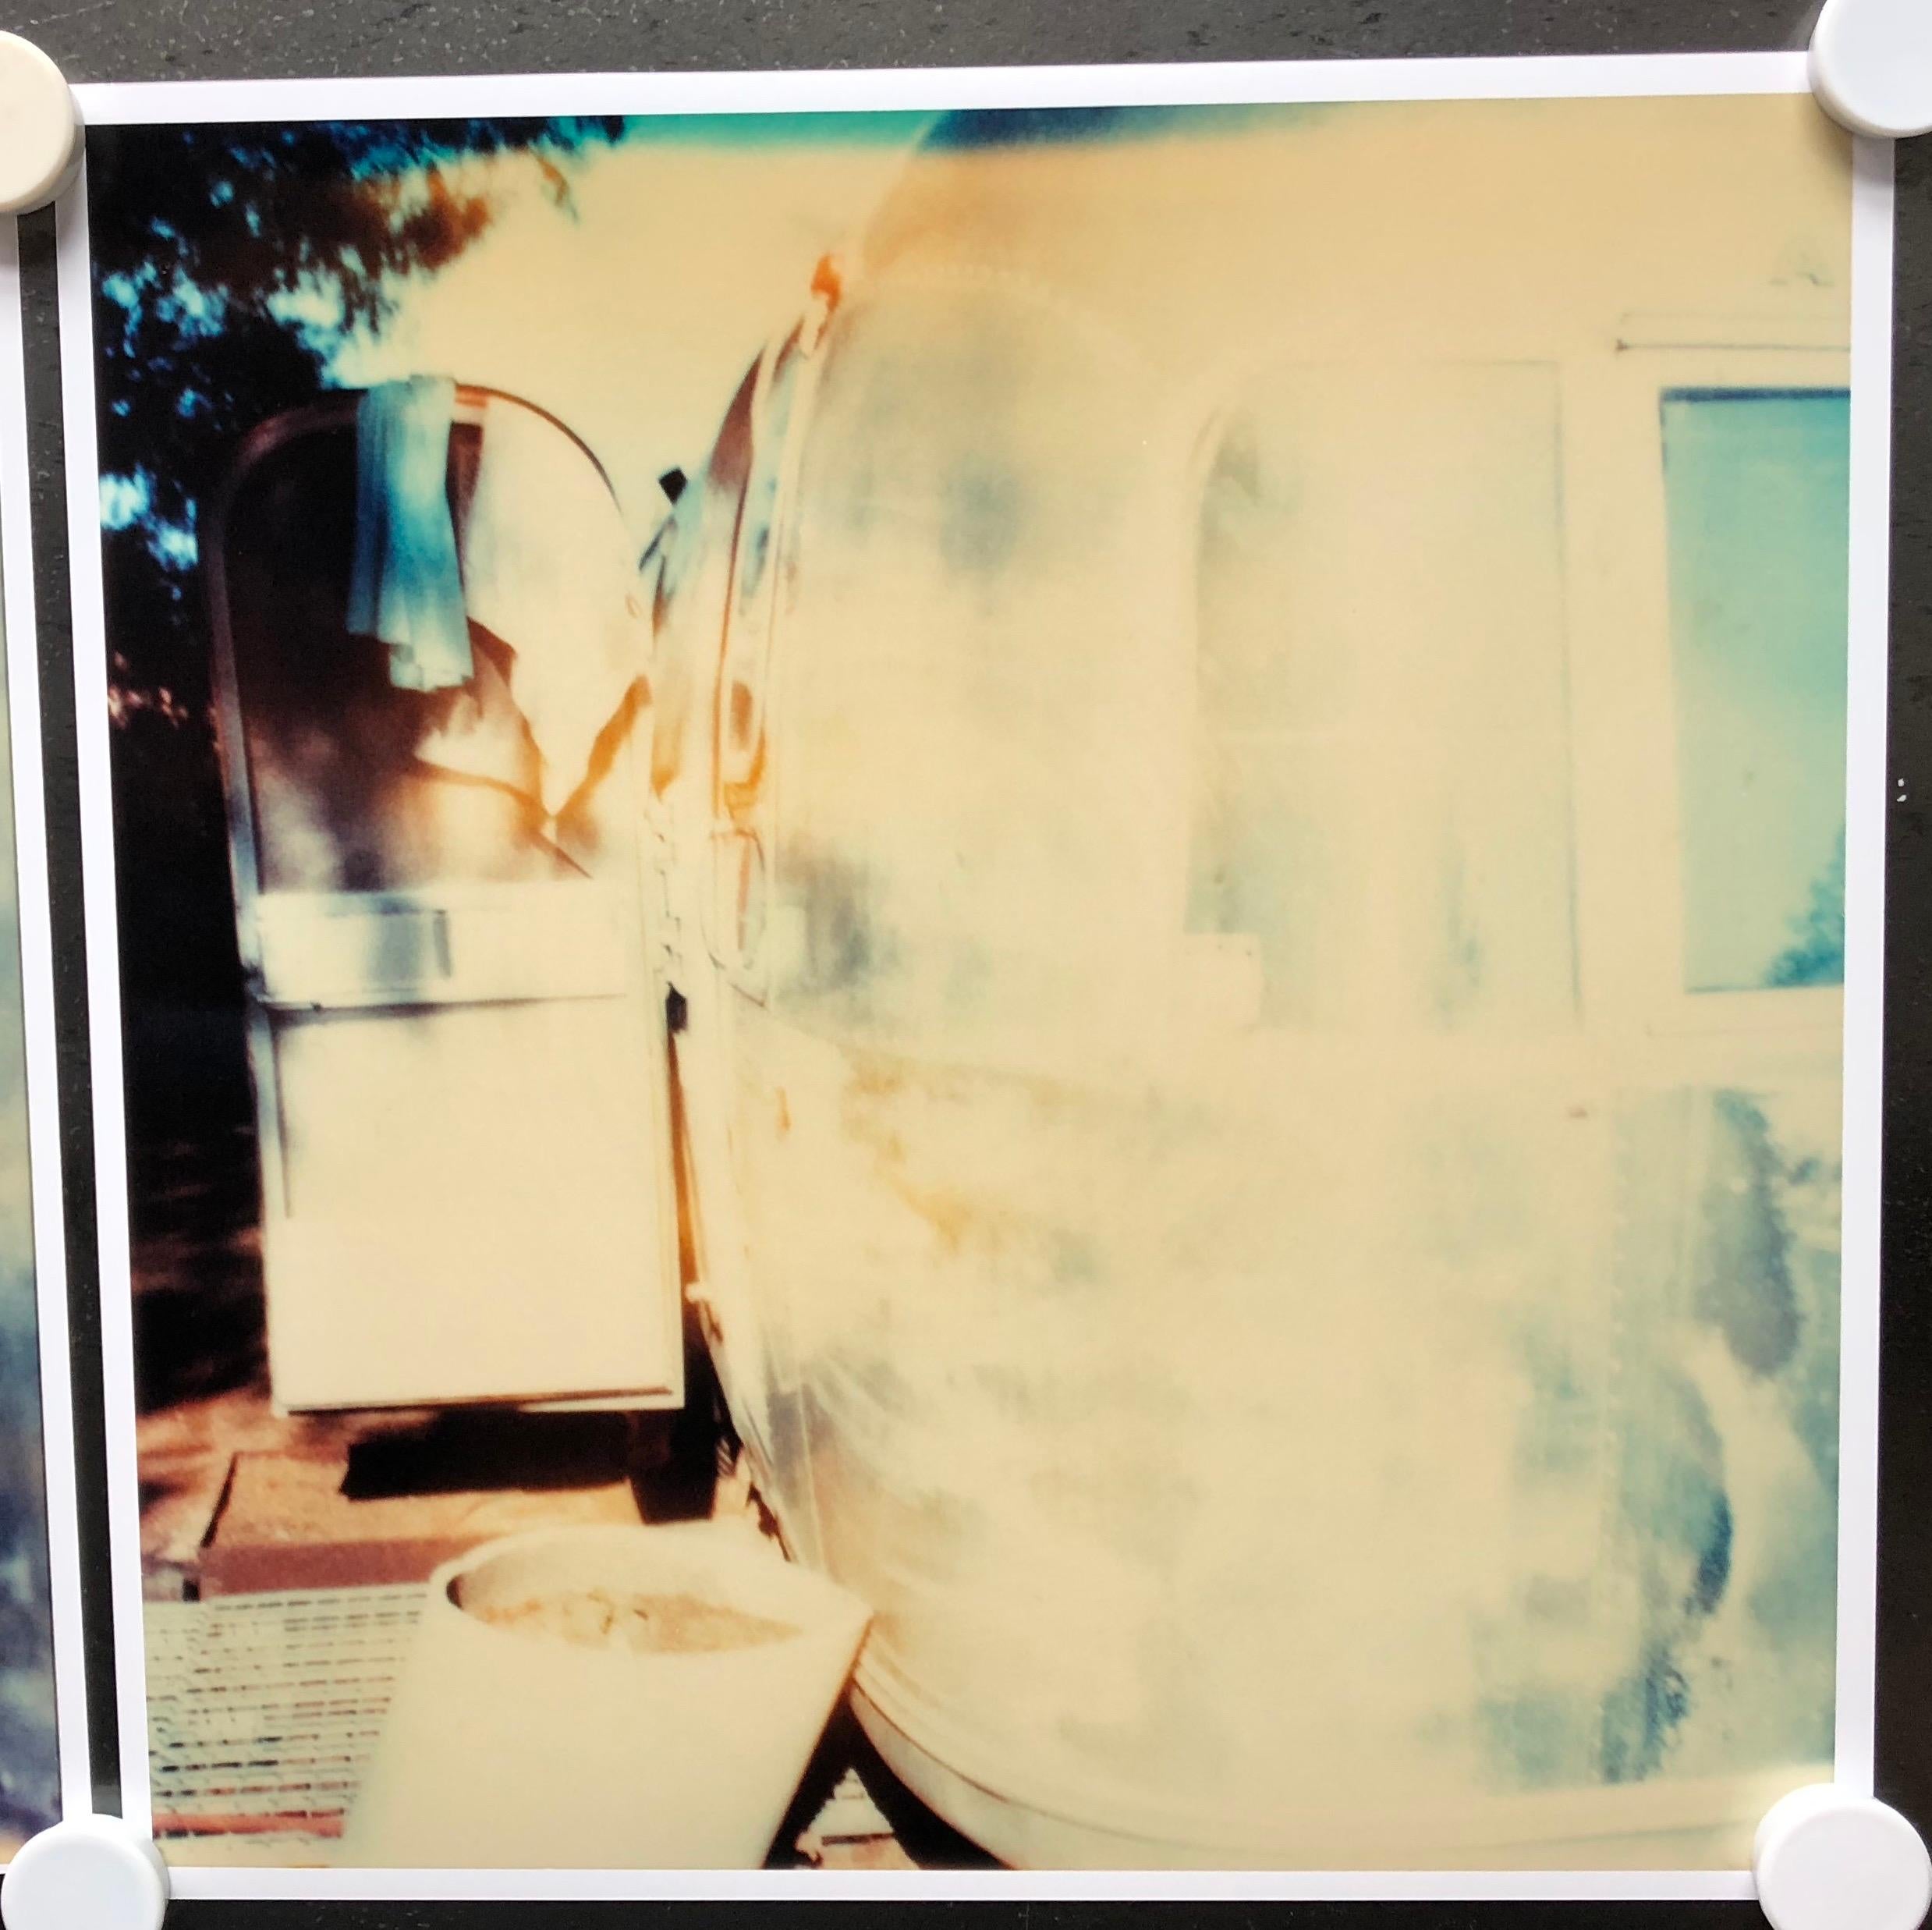 Sidewinder, analog, triptych, Contemporary, Polaroid, Photograph, Abstract, love 2